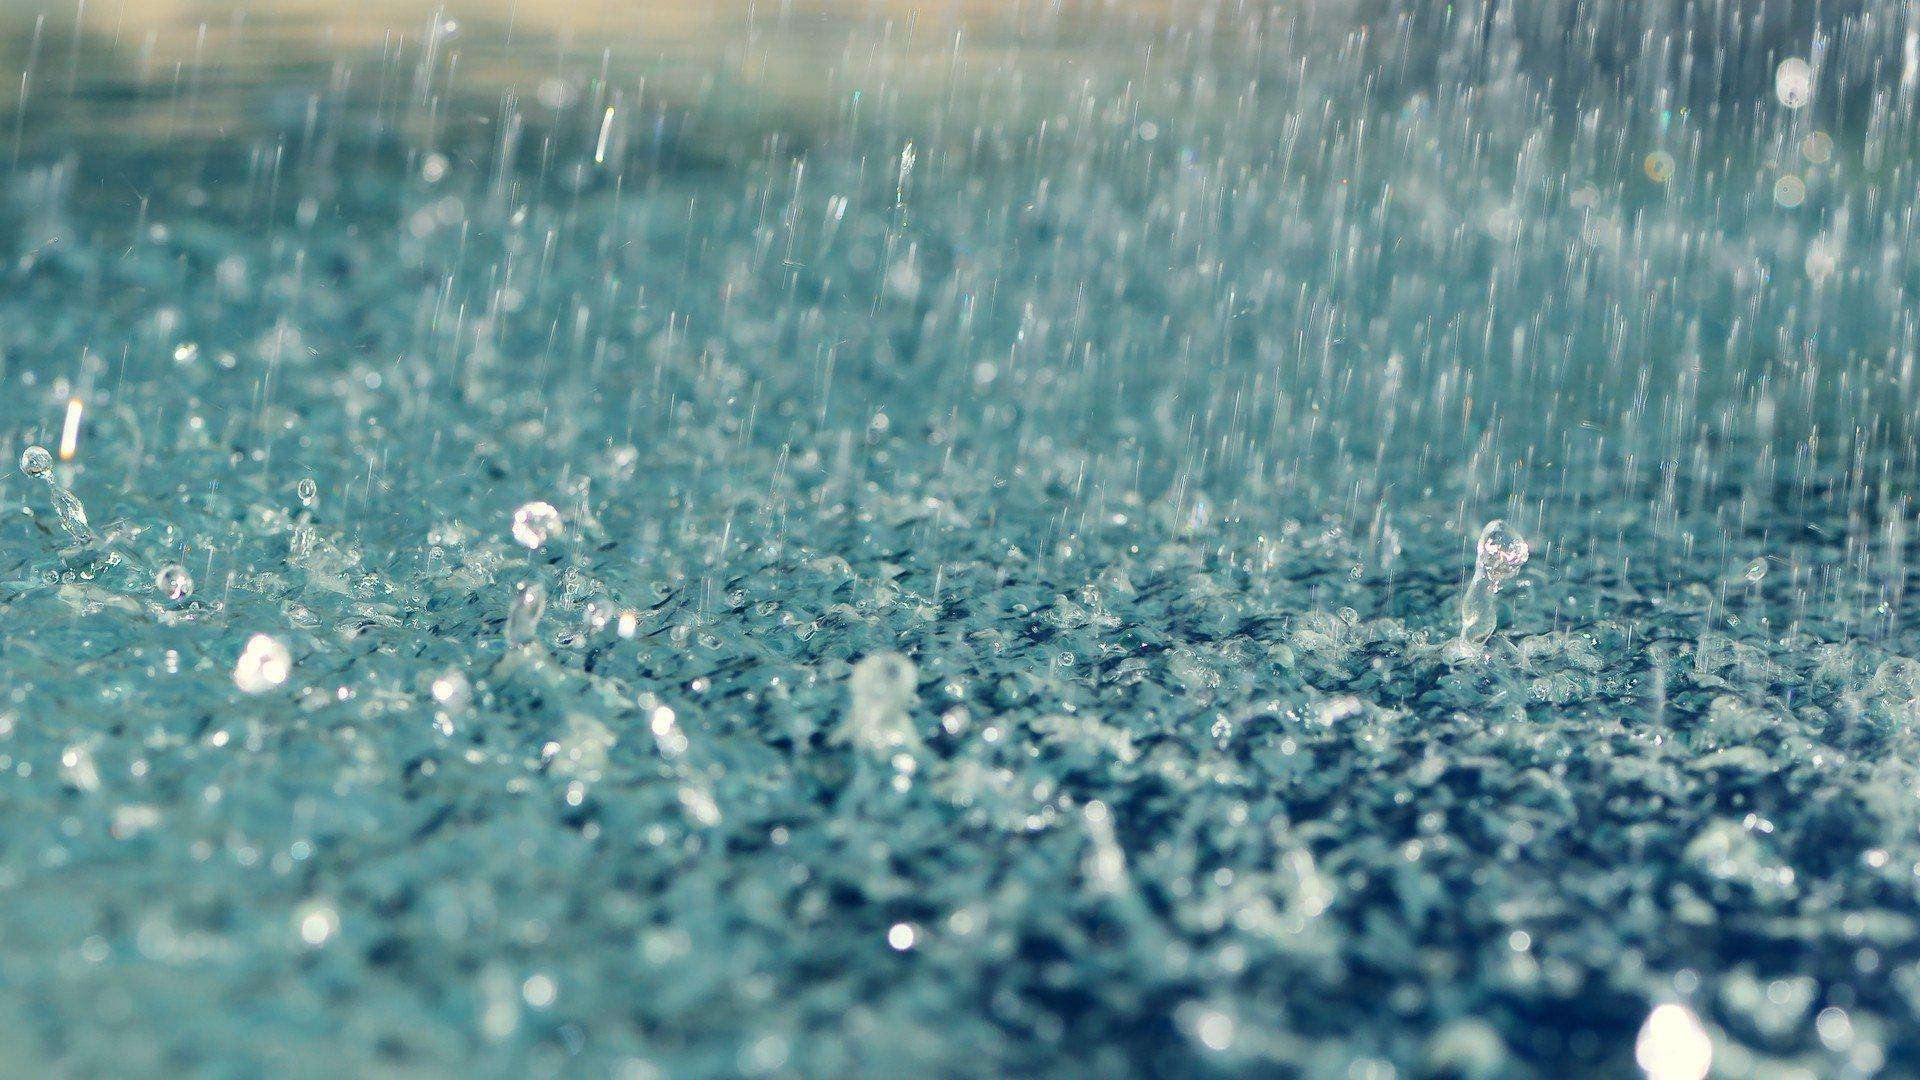 Wallpaper HD Rainy Nature 1080p Upload At August